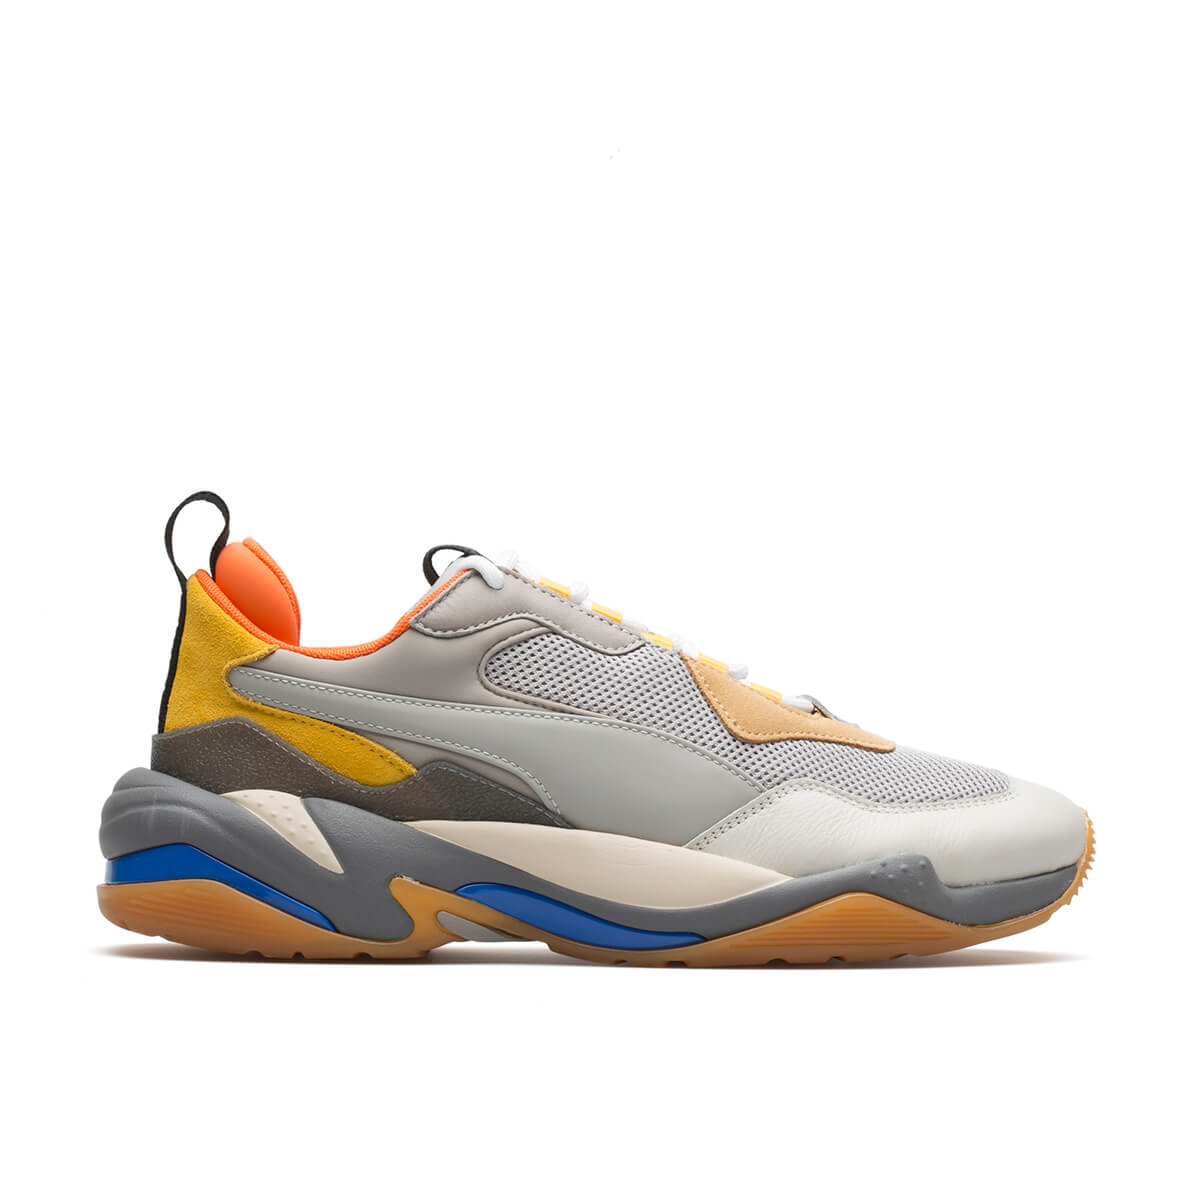 PUMA Thunder Spectra sneakers